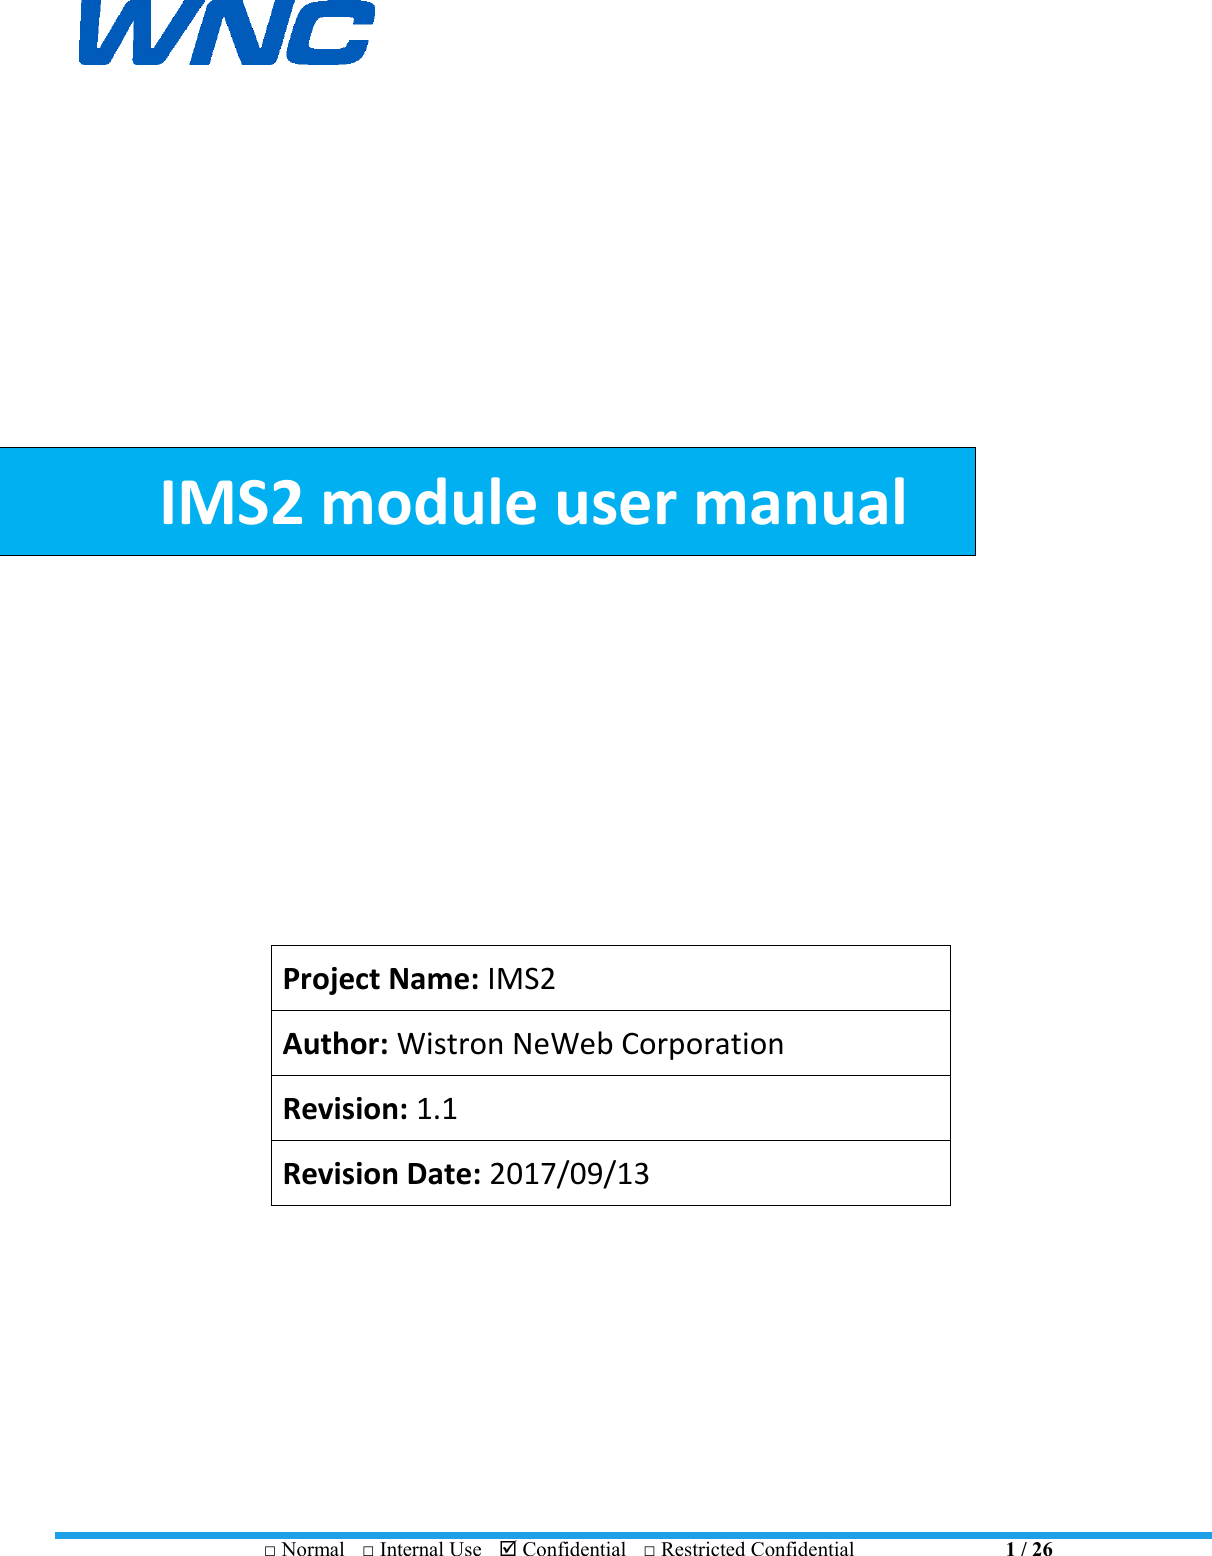   □ Normal  □ Internal Use   Confidential  □ Restricted Confidential                                    1 / 26                    IMS2 module user manual             Project Name: IMS2 Author: Wistron NeWeb Corporation Revision: 1.1 Revision Date: 2017/09/13 